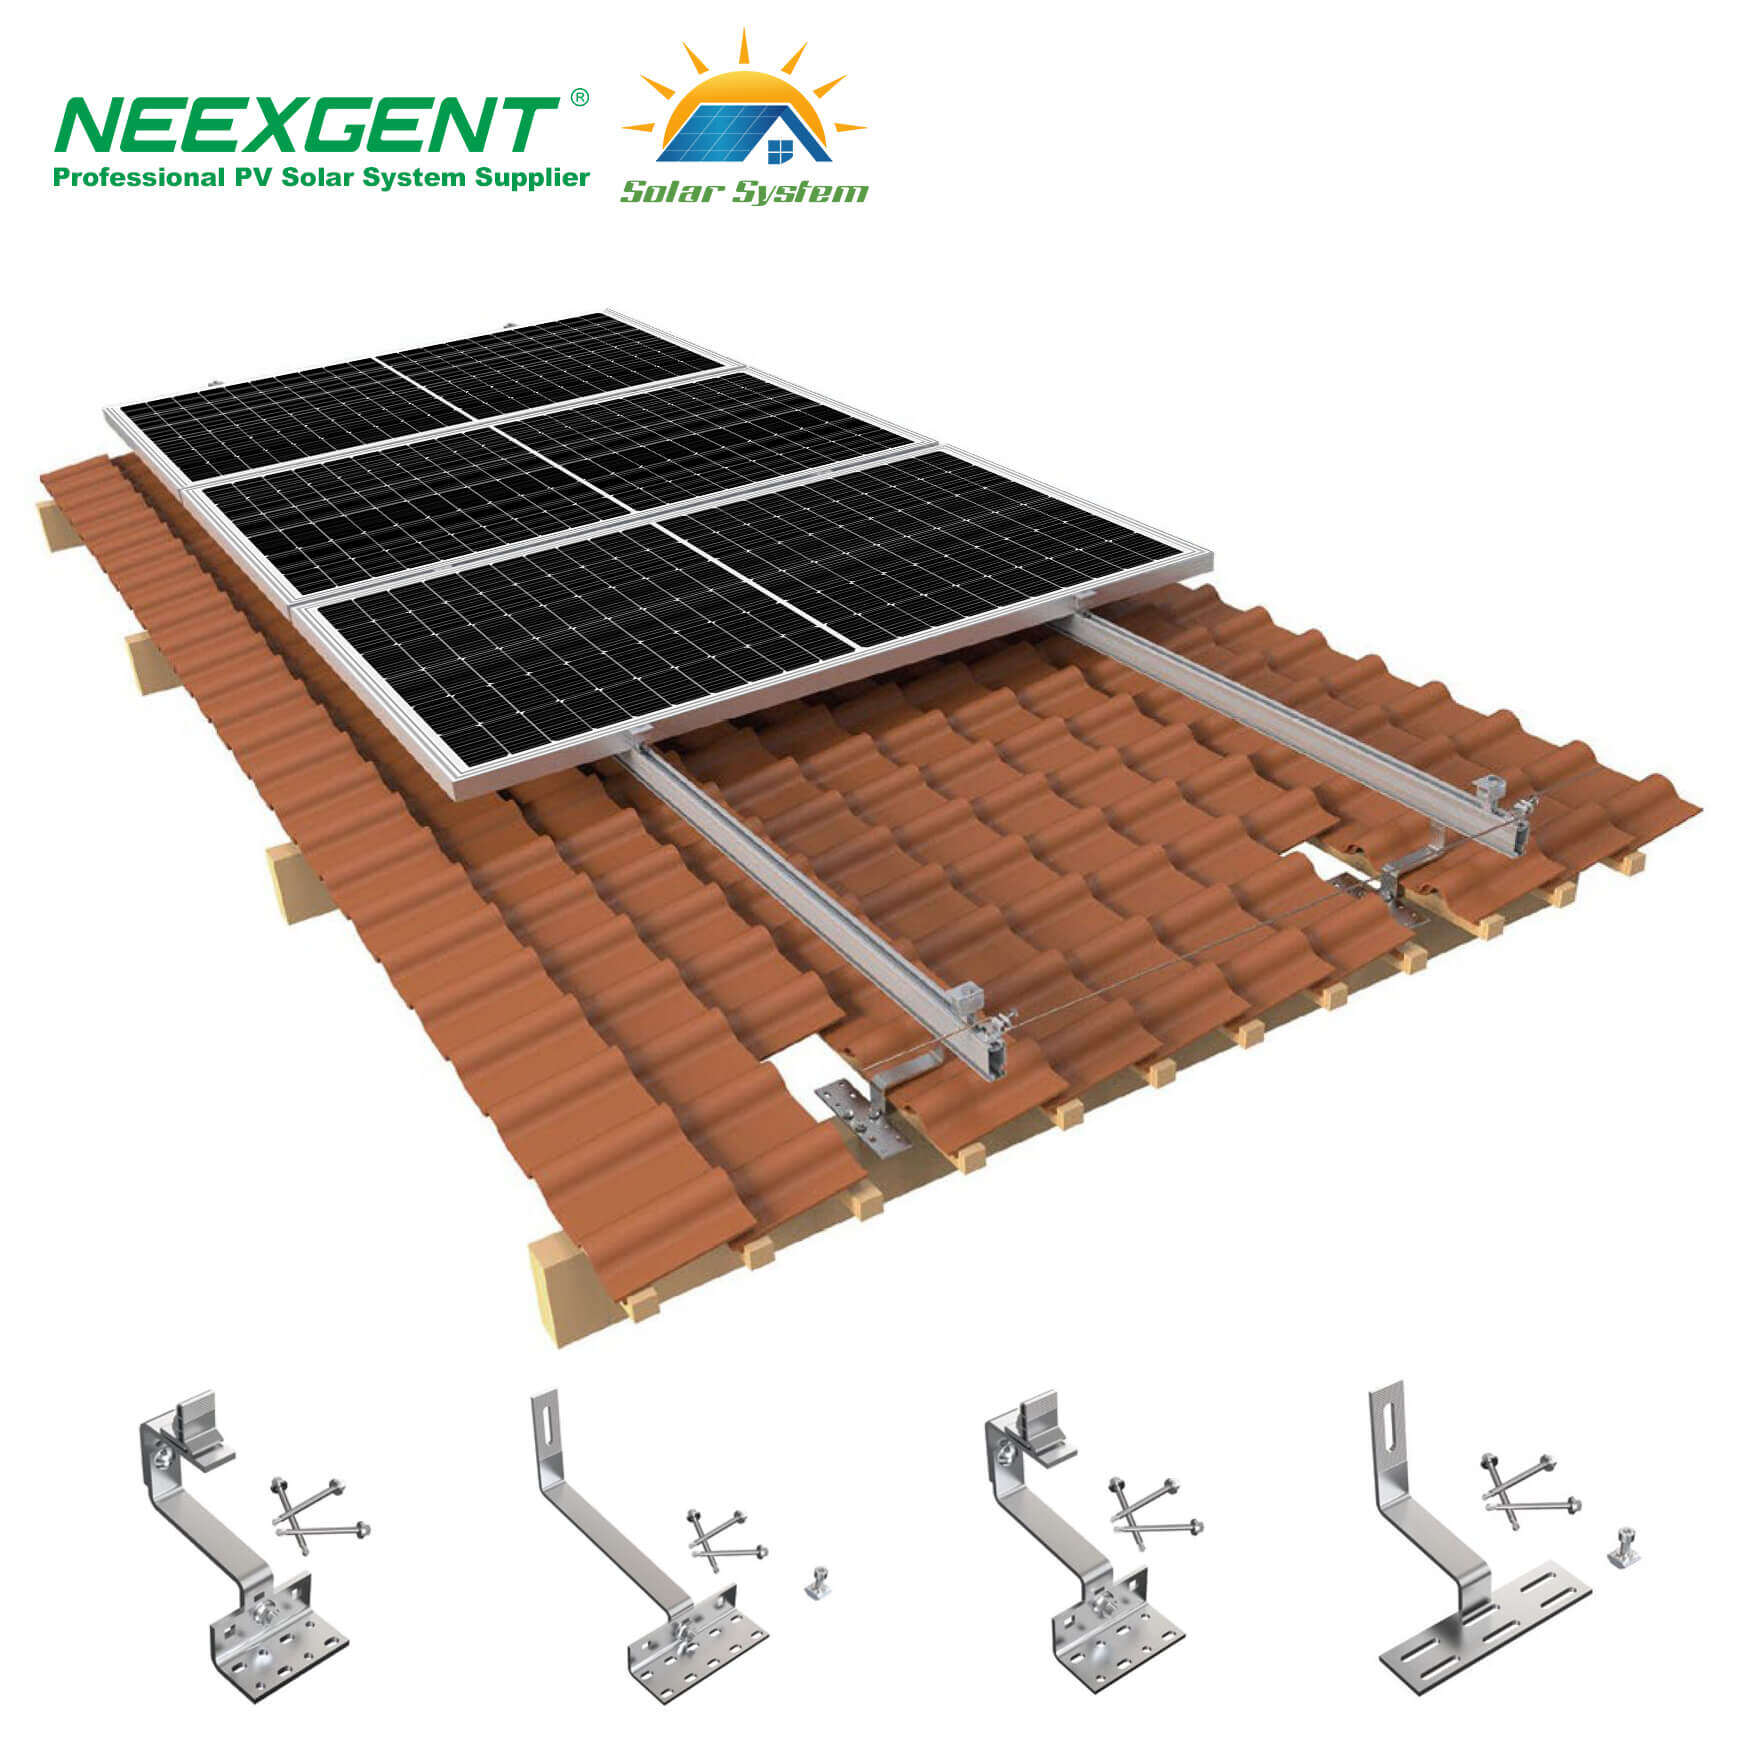 8kw solar panel system for off-grid living